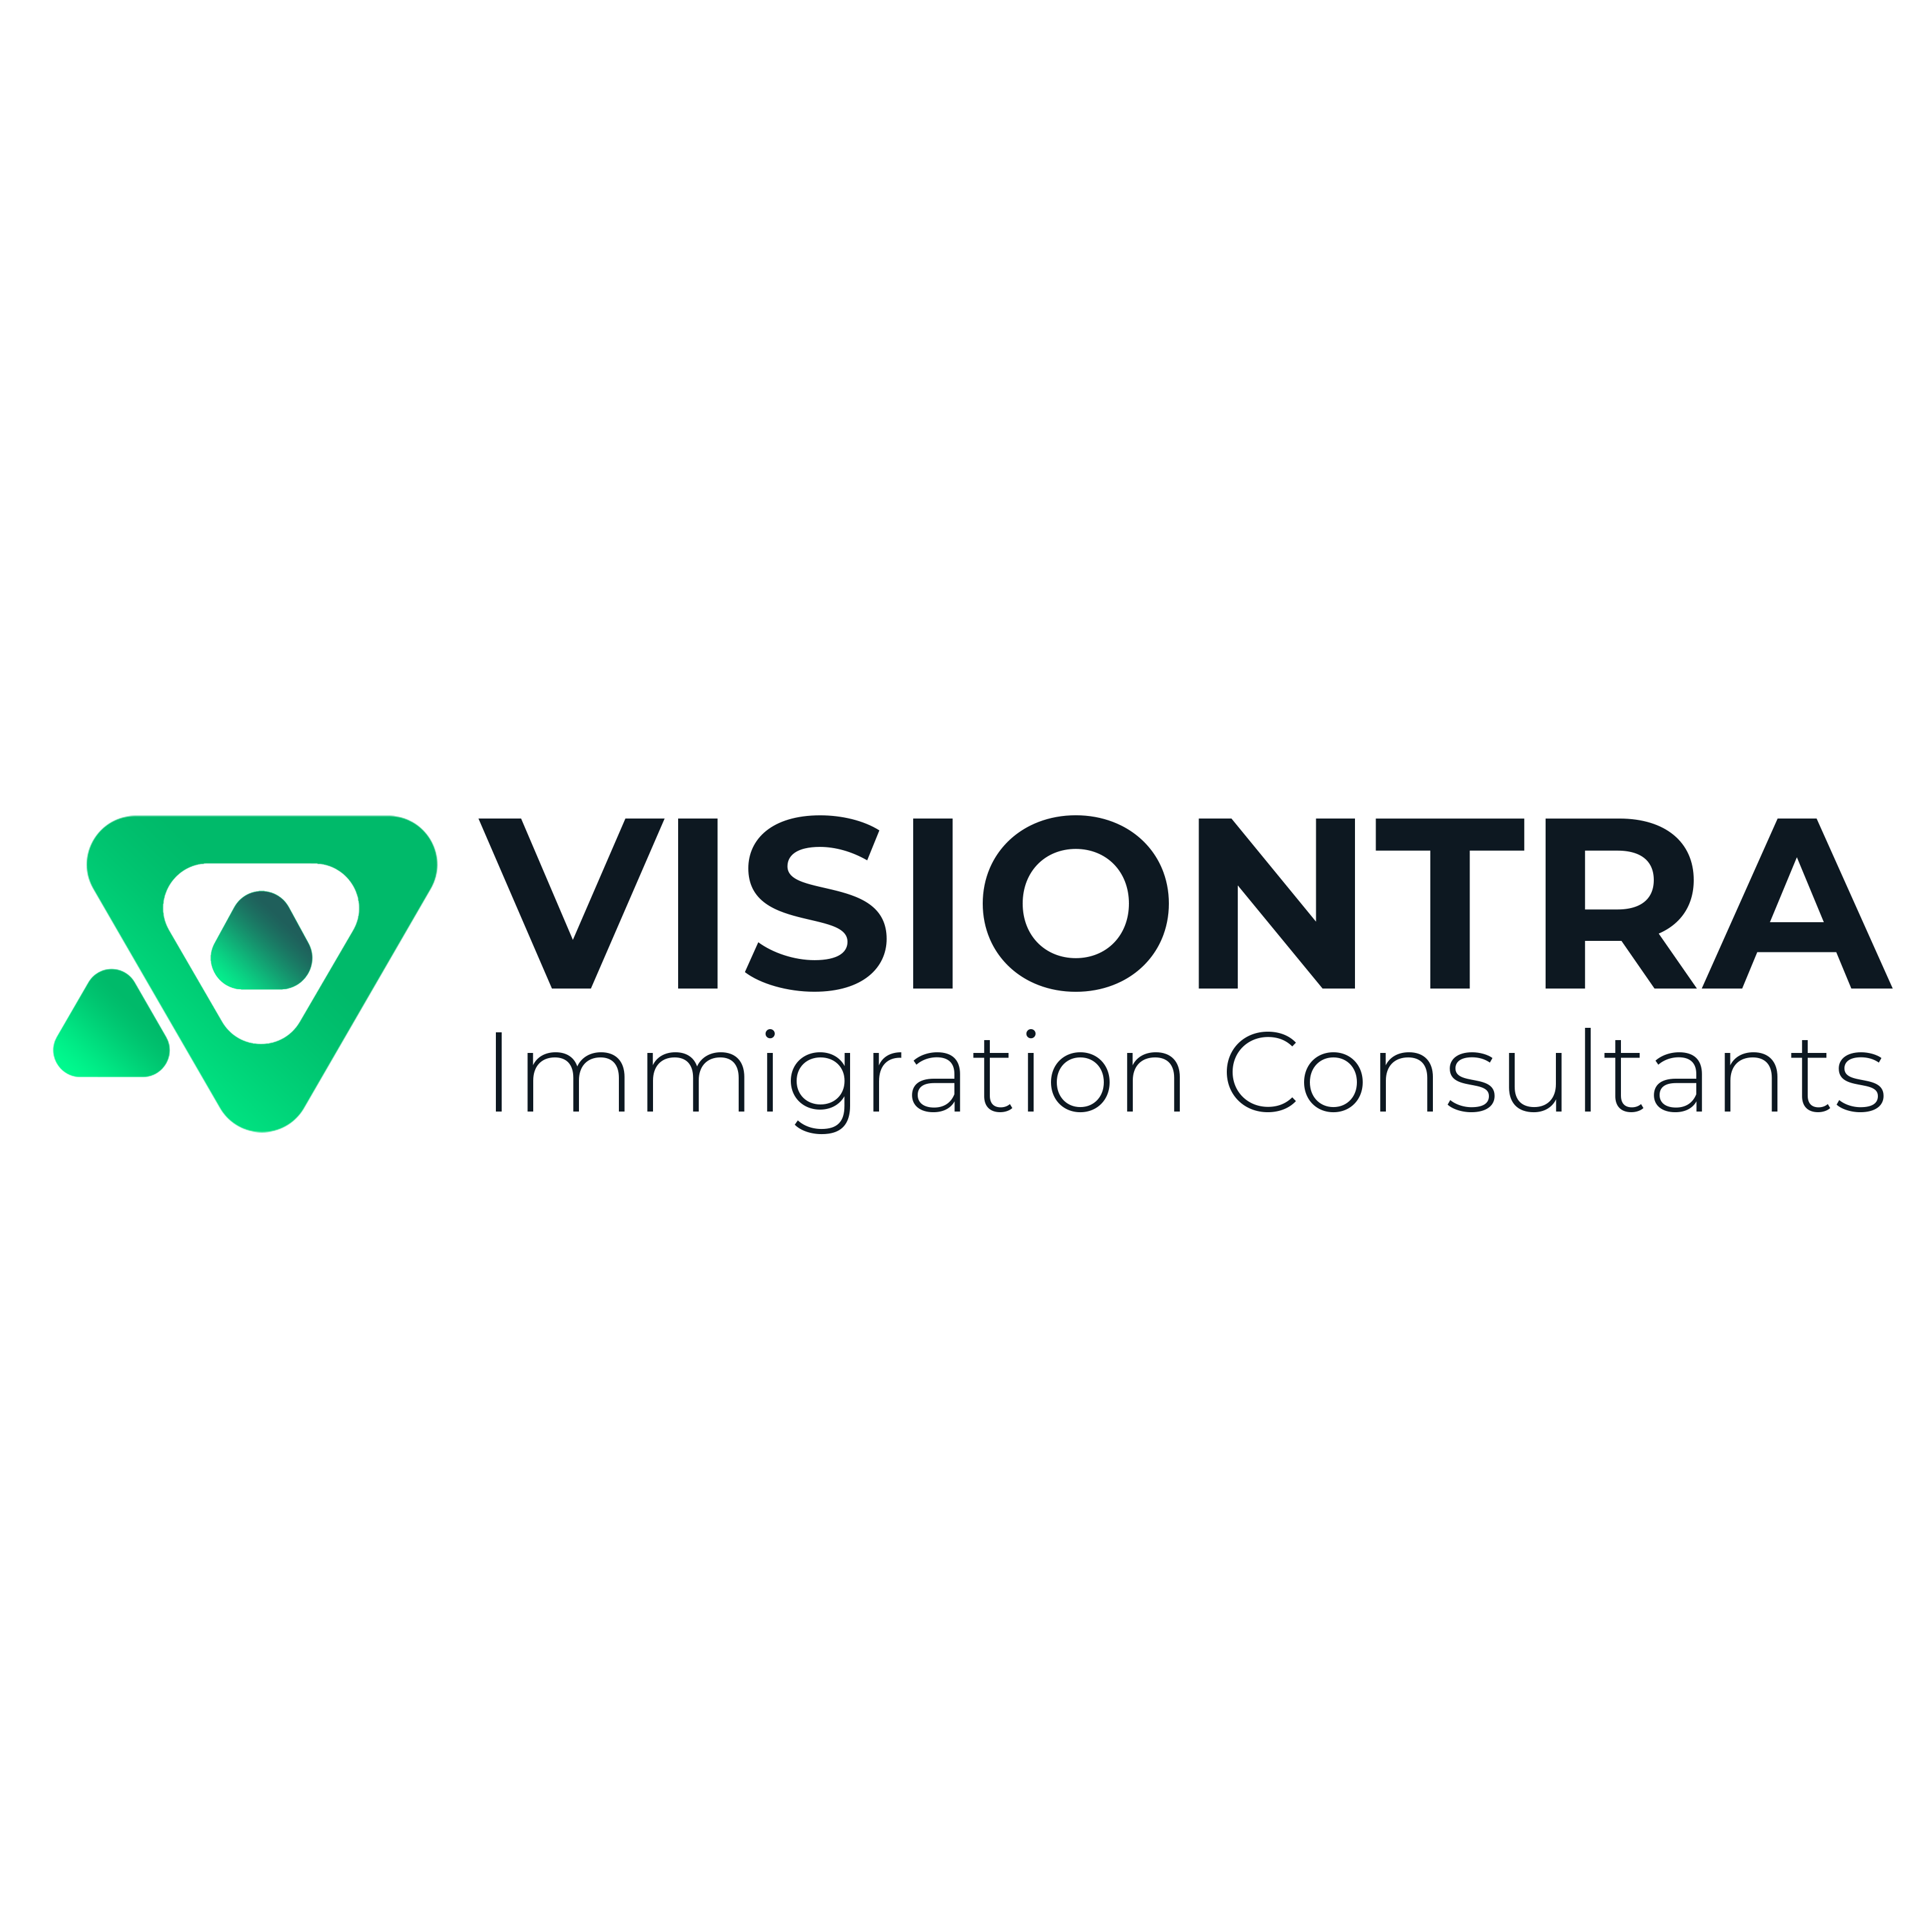 visiontra immigration consultants main logo.png